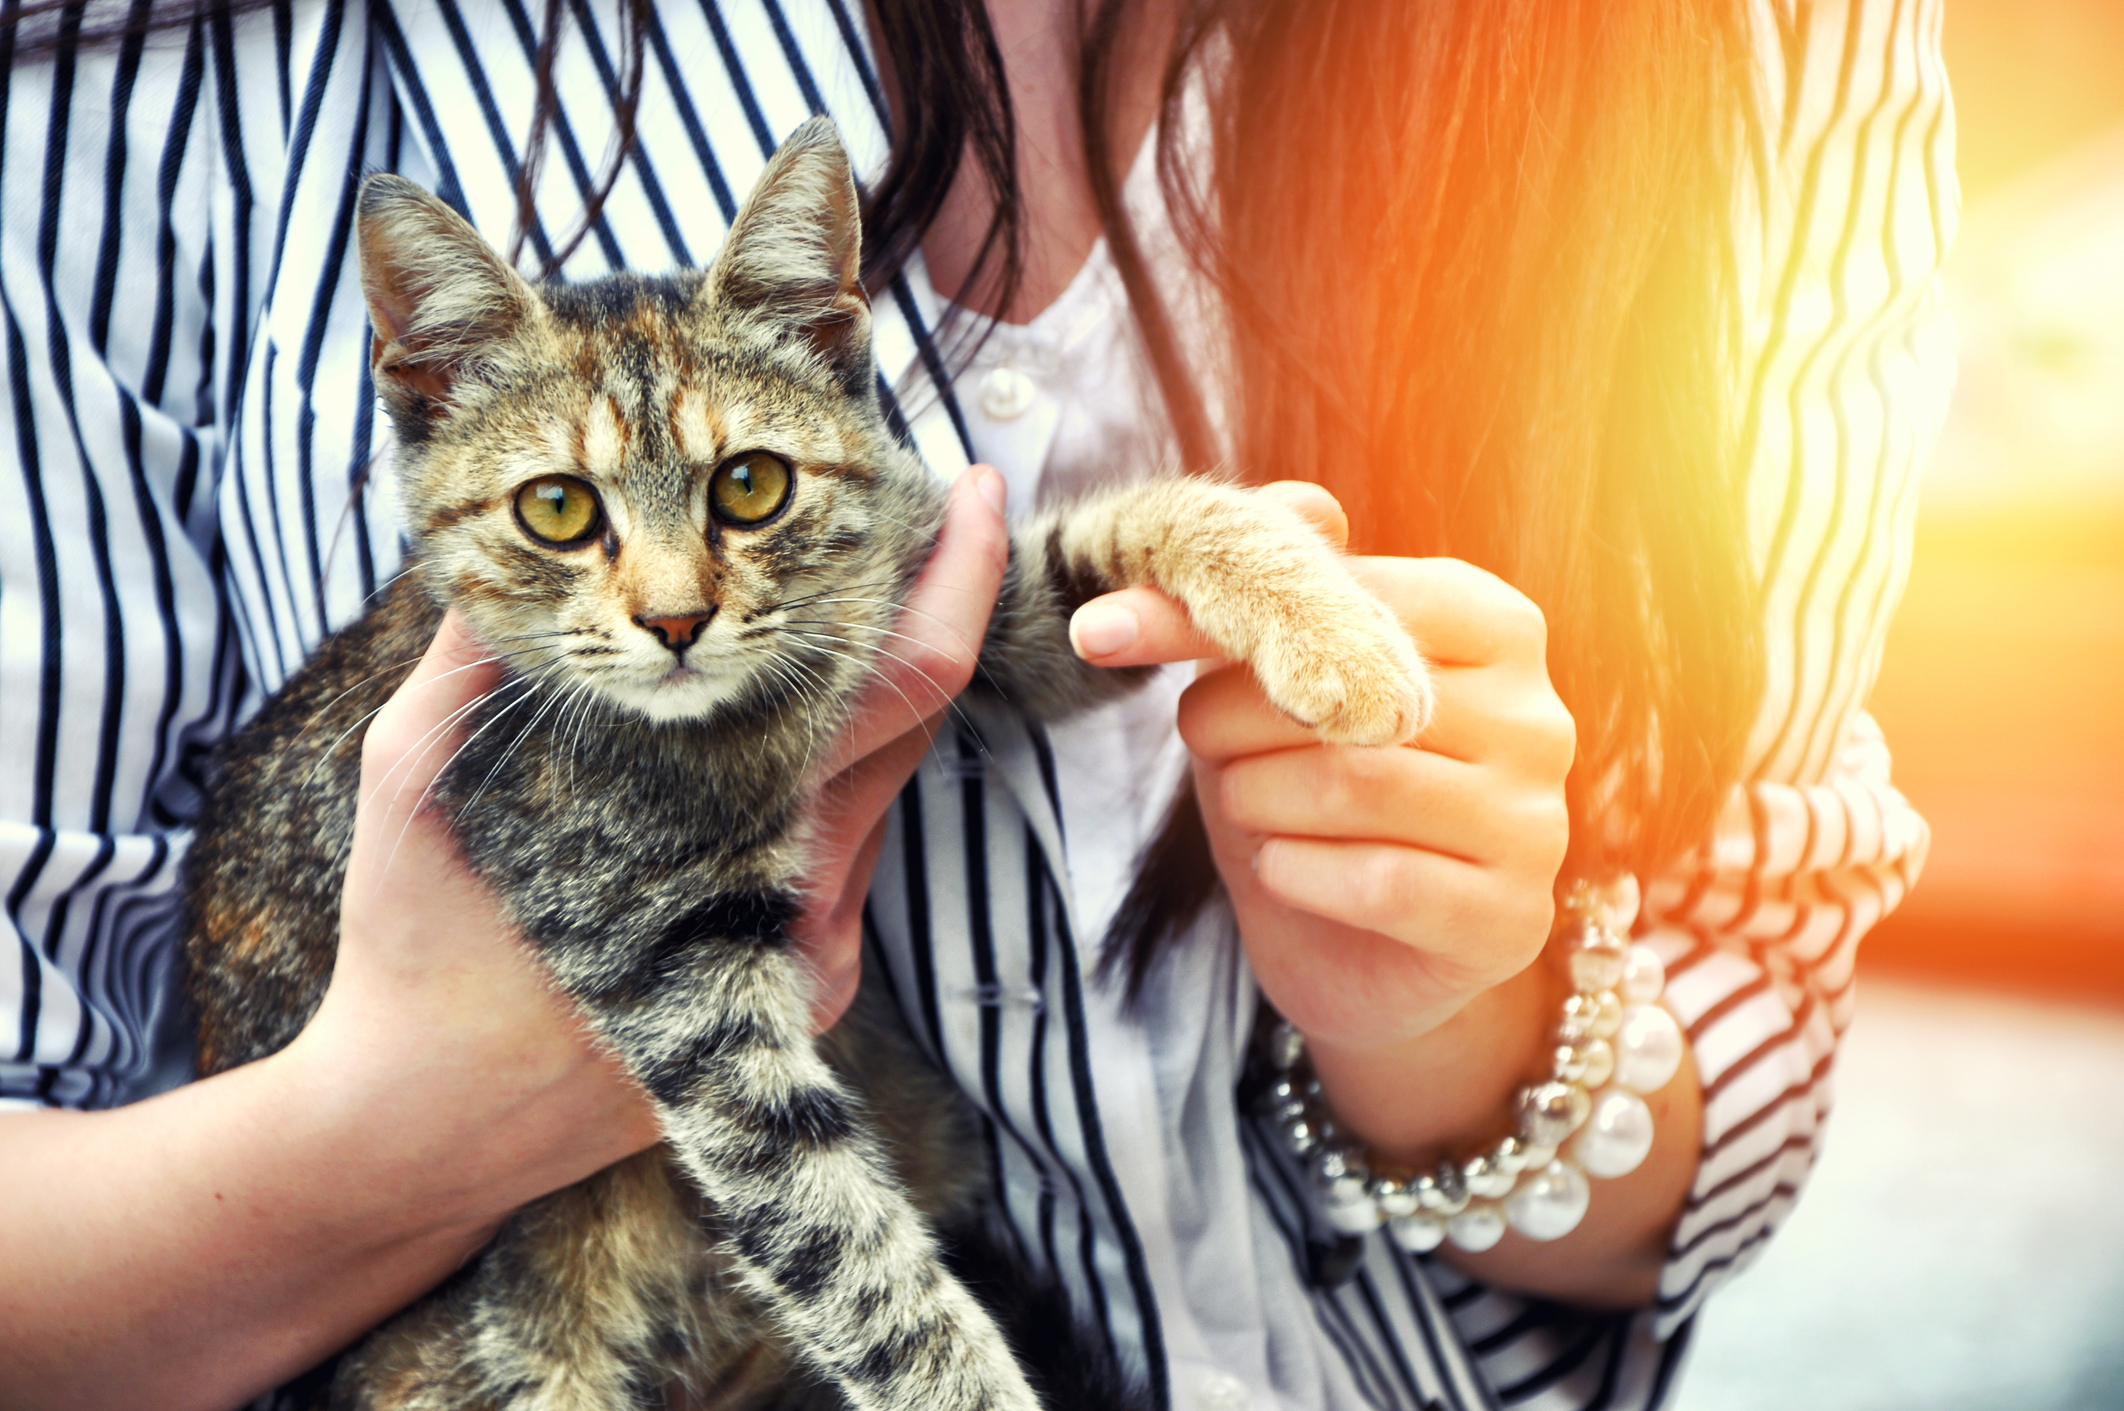 Having a cat could protect you against a staph infection